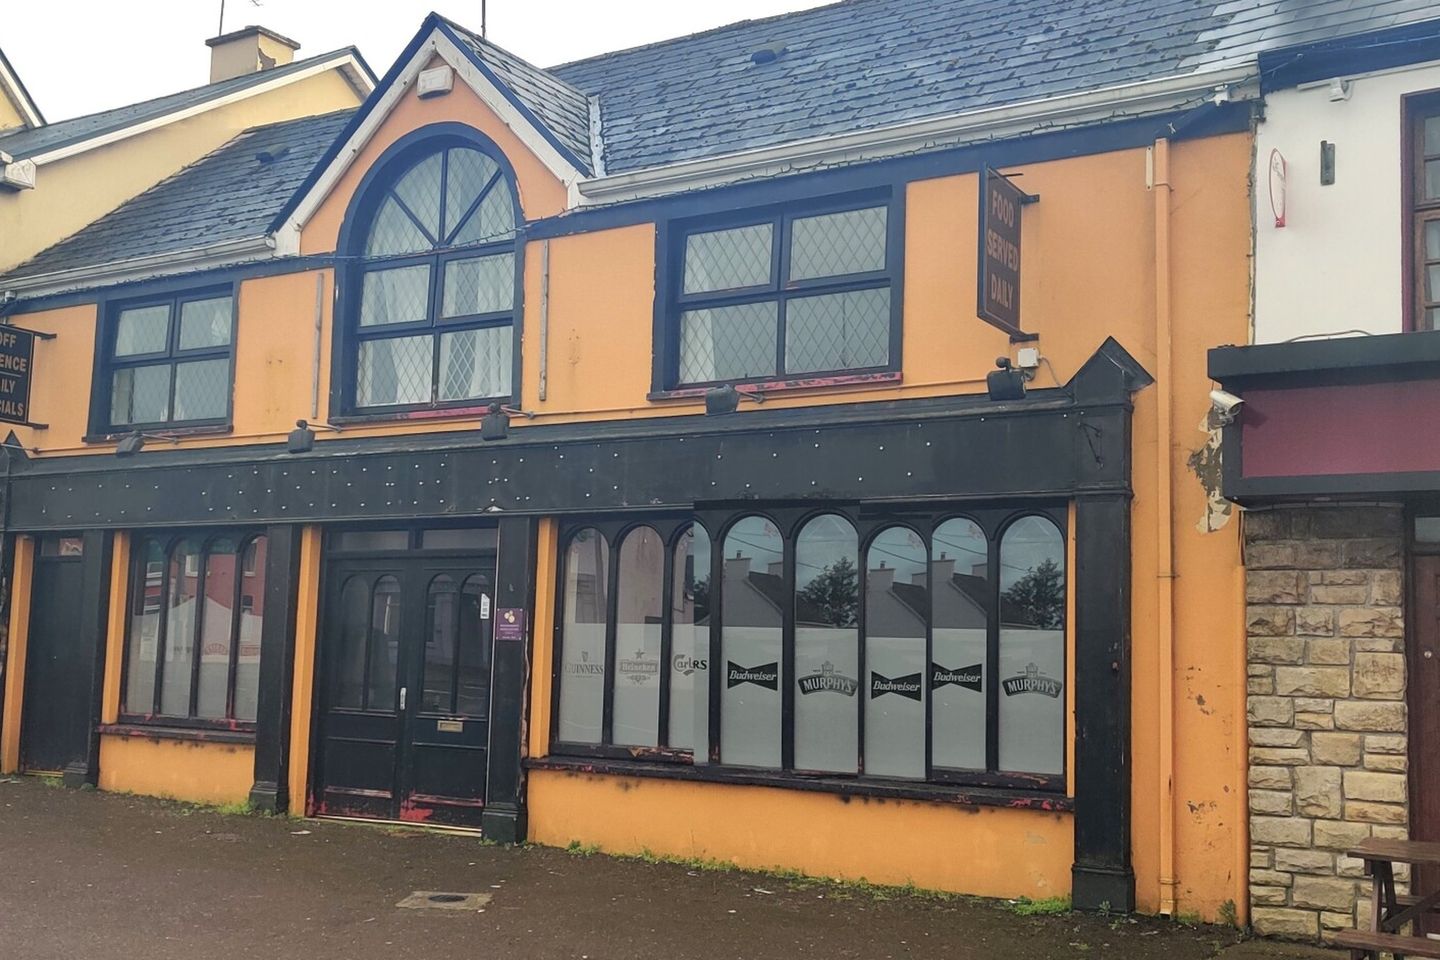 Restaurant/Office/Retail, West End, Rathmore, Co. Kerry